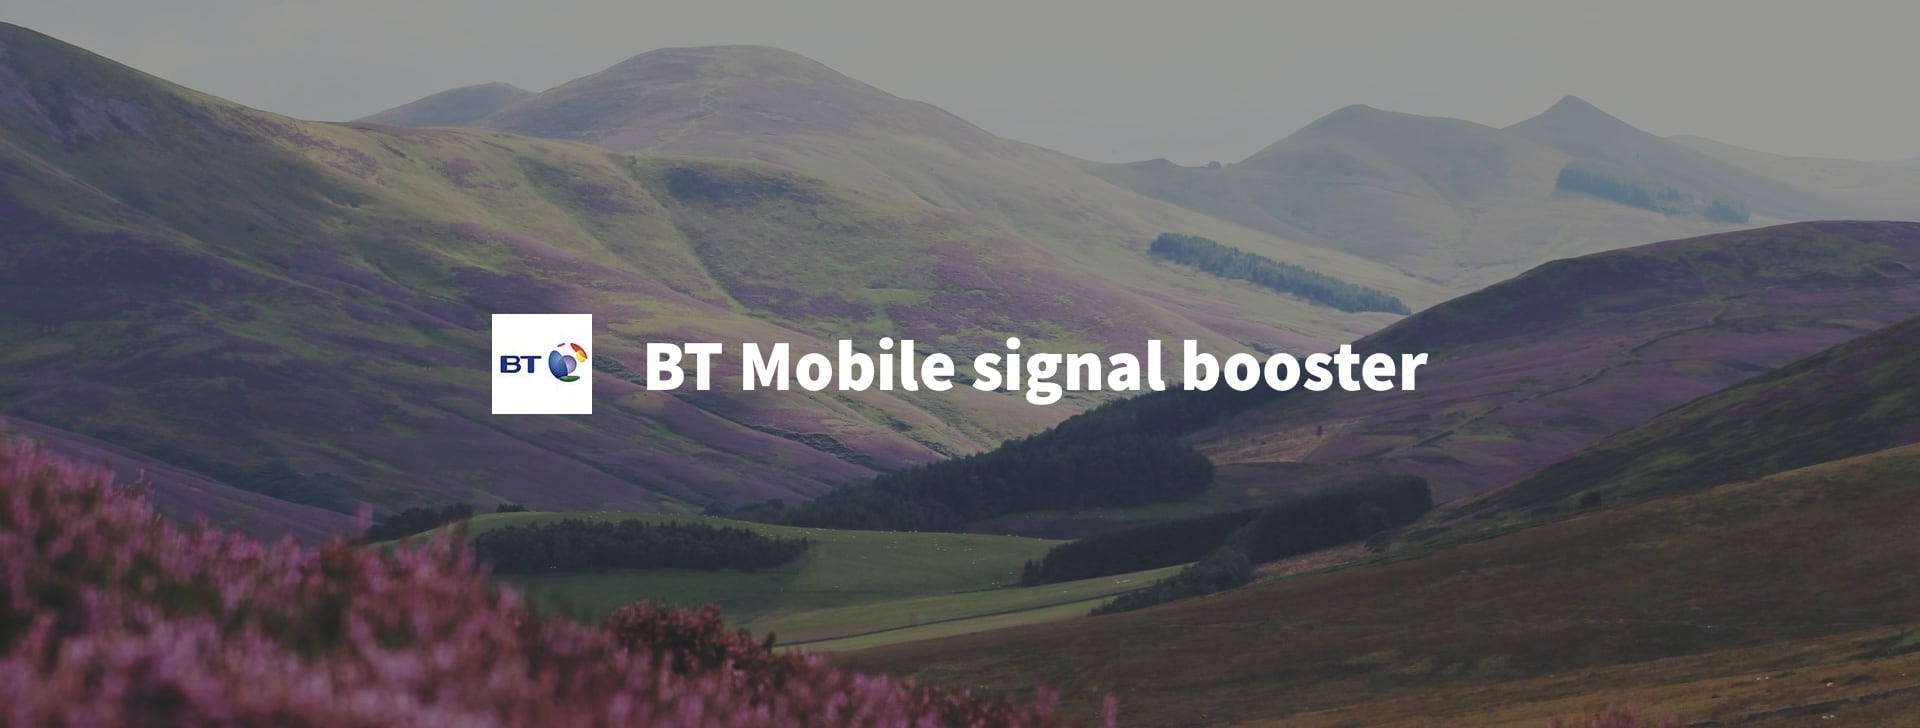 BT Mobile phone signal booster